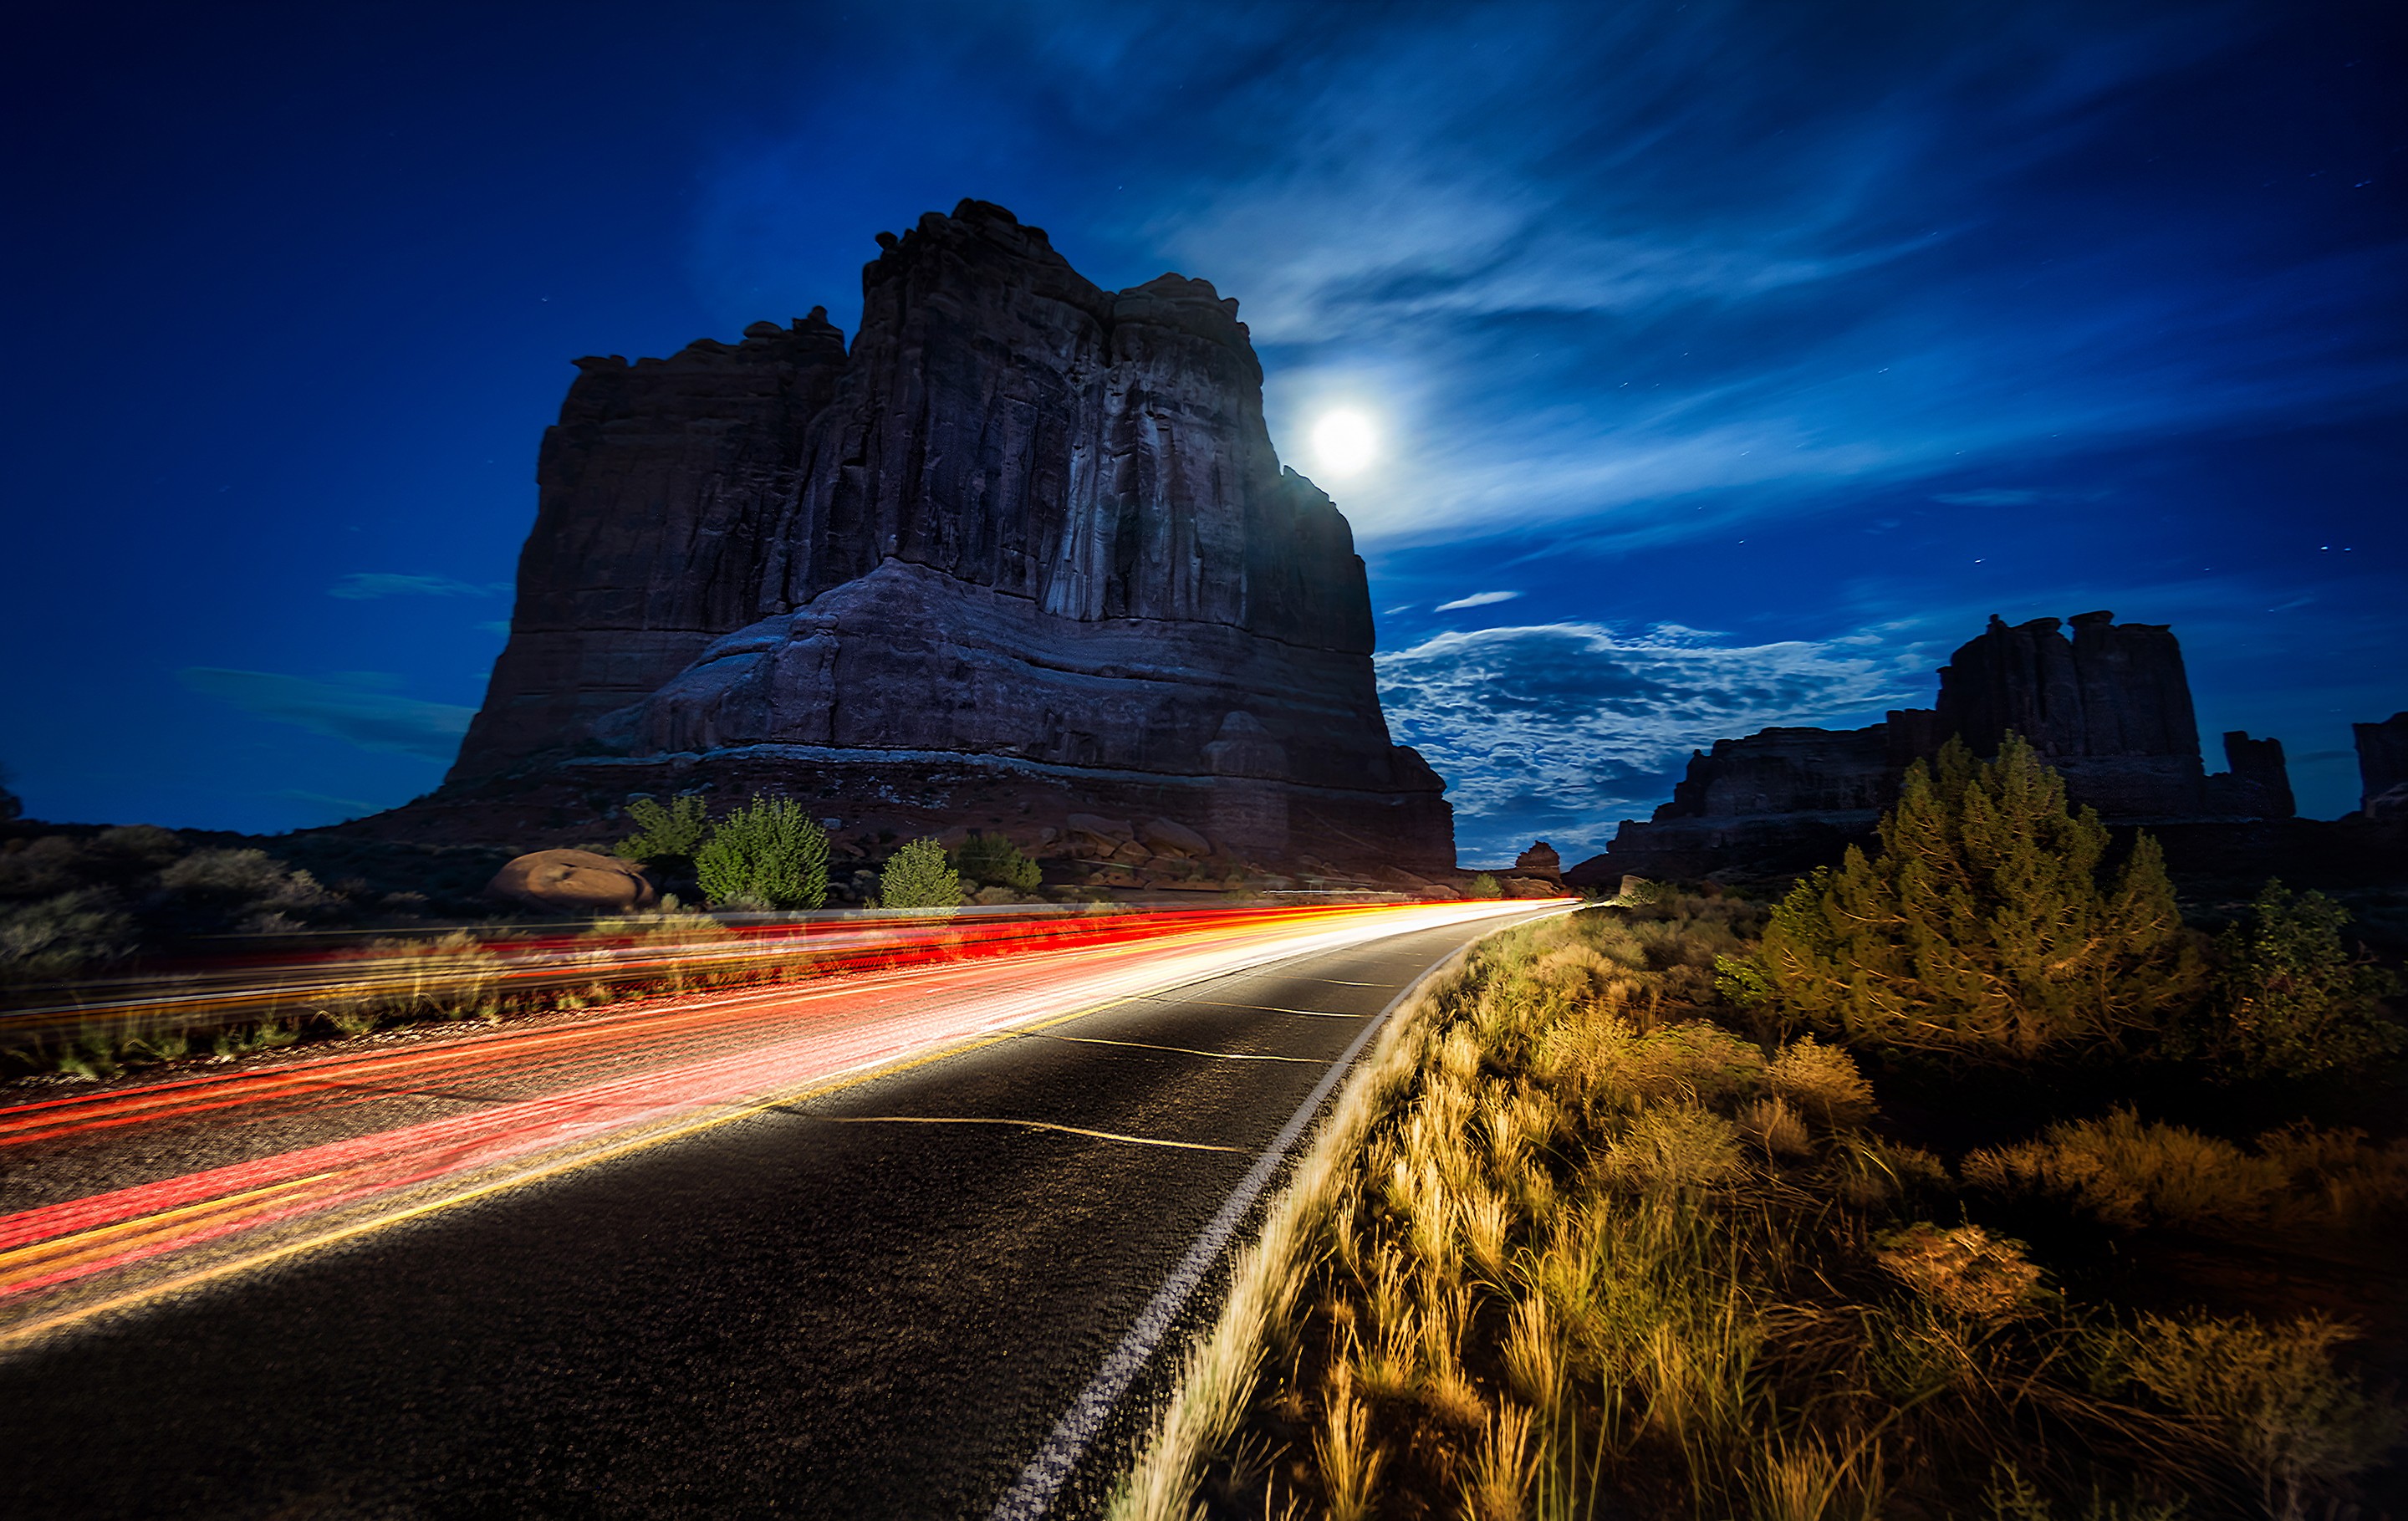 Night Road Utah USA Landscape Arches National Park USA Road Canyon Long Exposure Light Trails Rock F 2880x1819